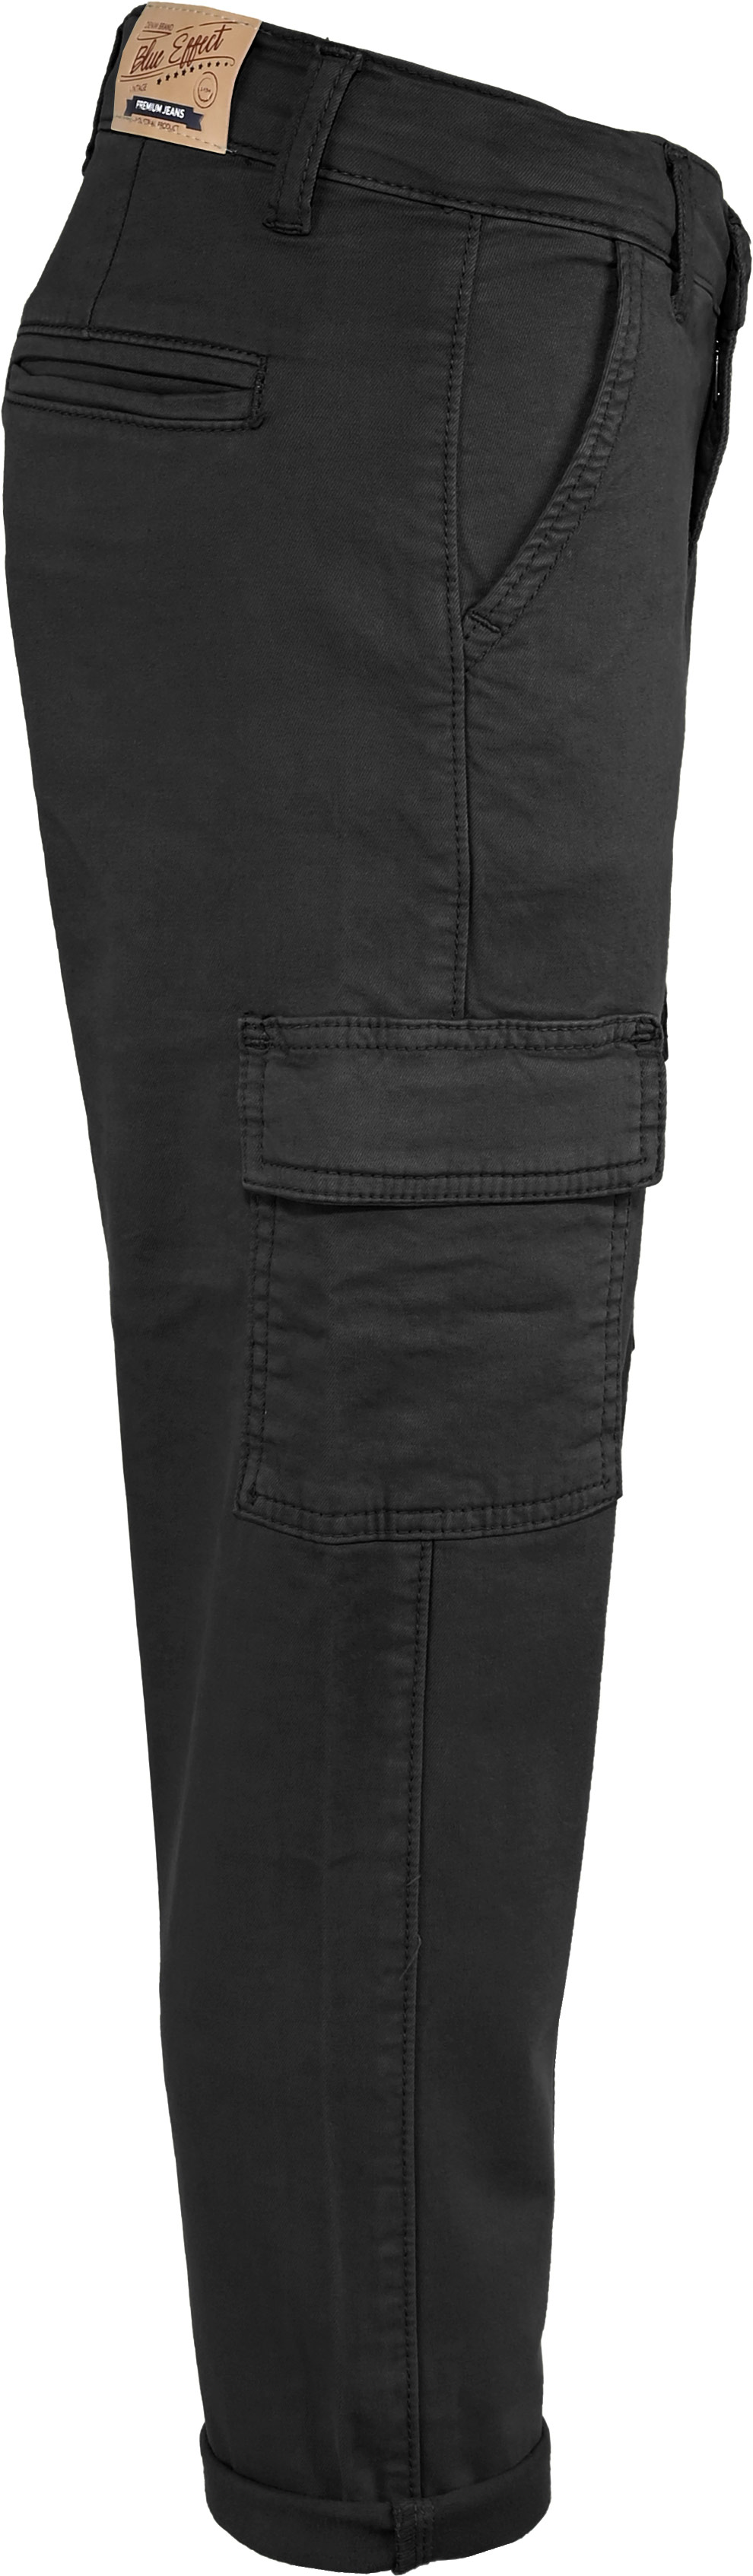 2851-Boys Wide Leg Cargo Pant available in Normal